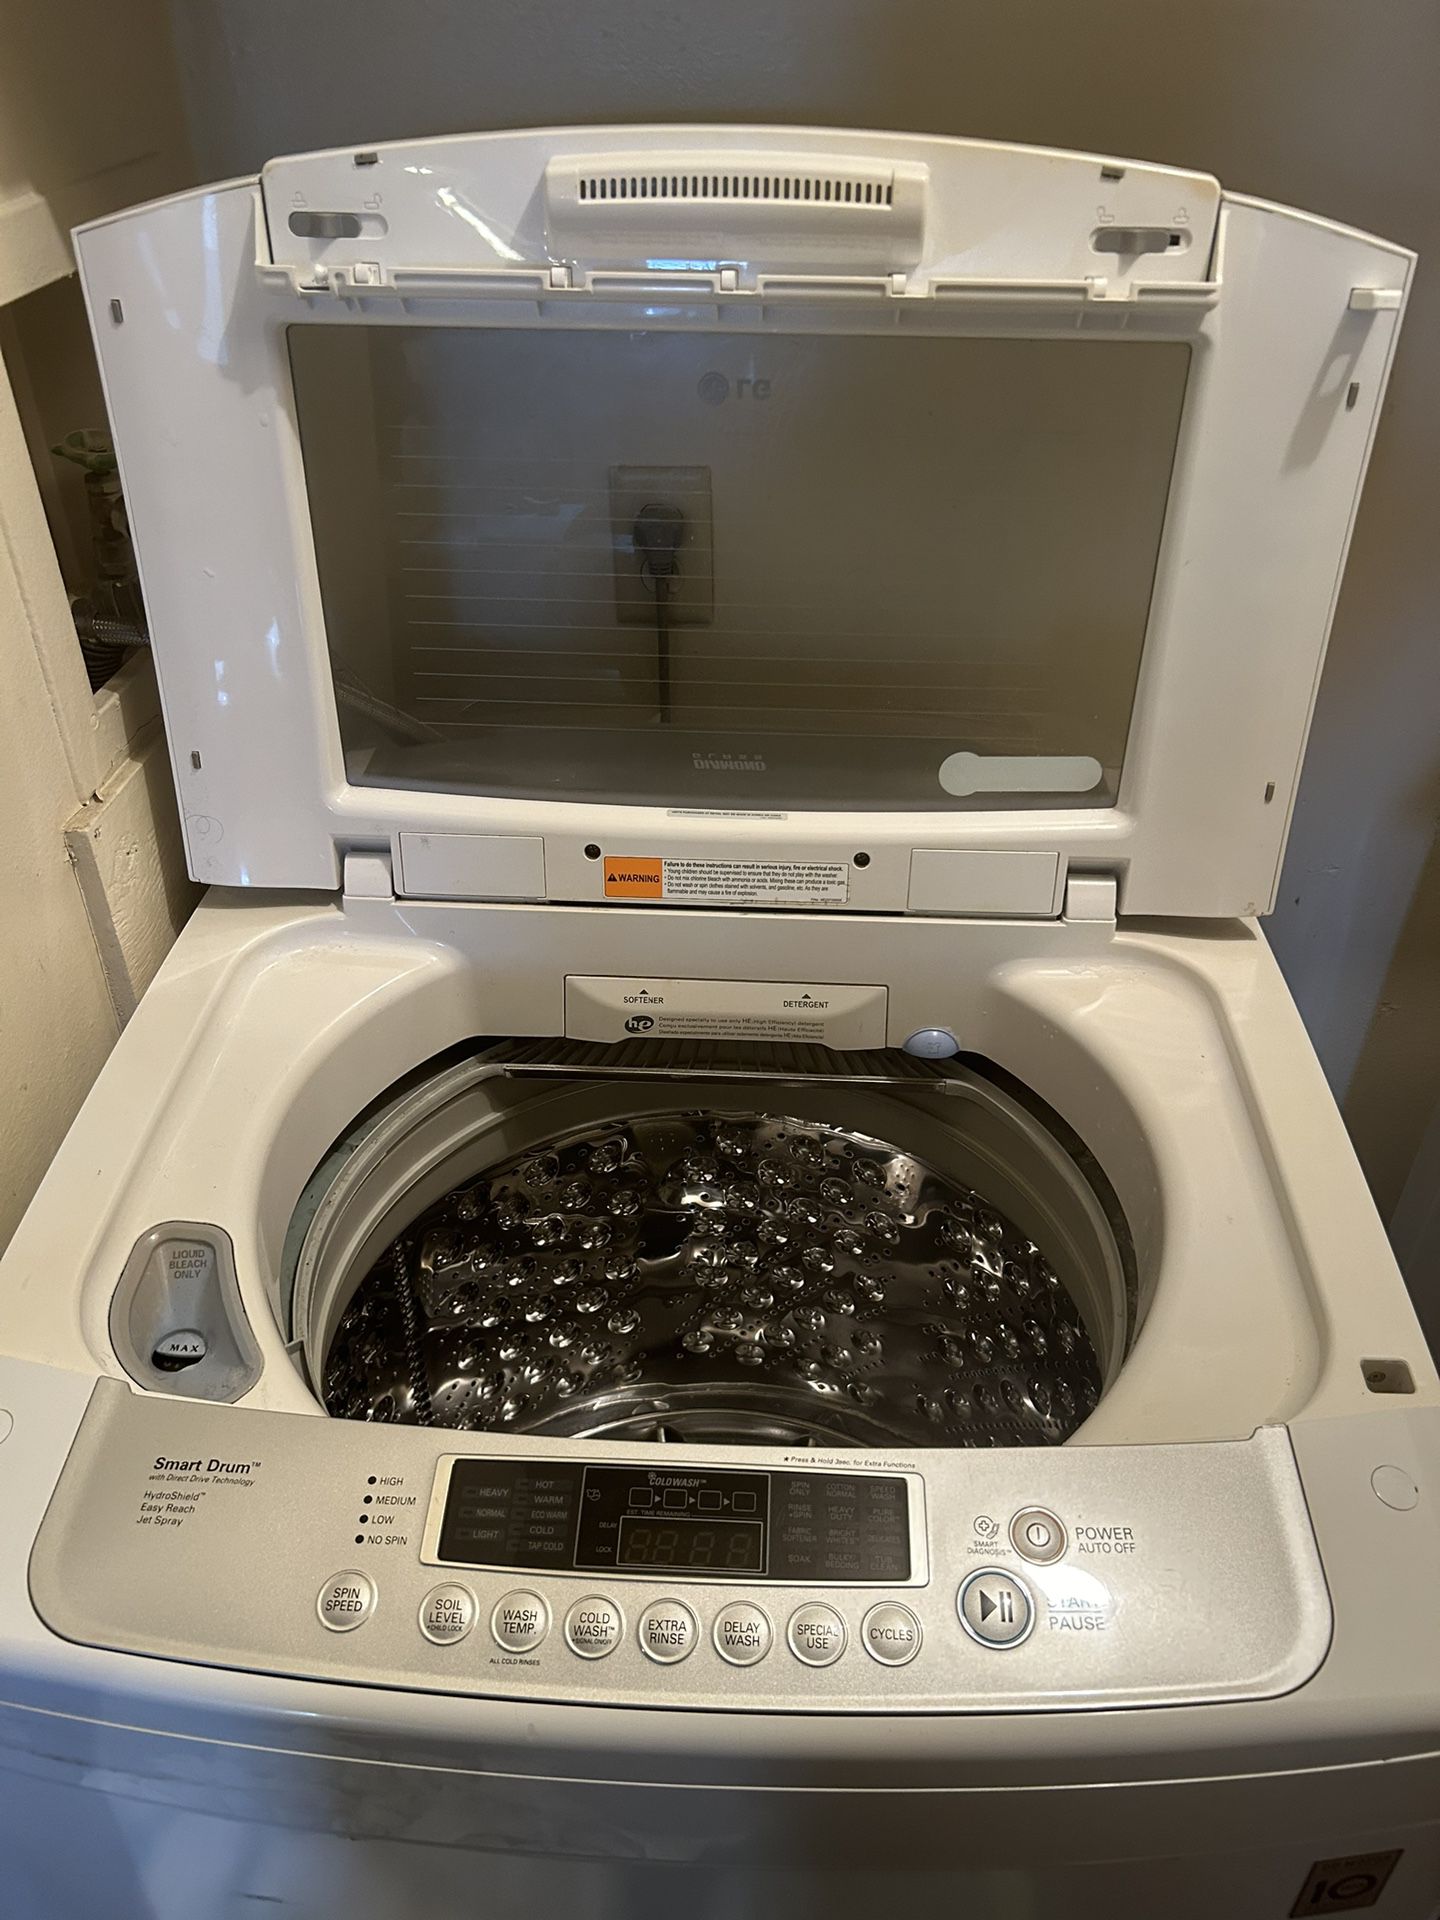 Washer and Dryer Need Gone BY MAY 8th 